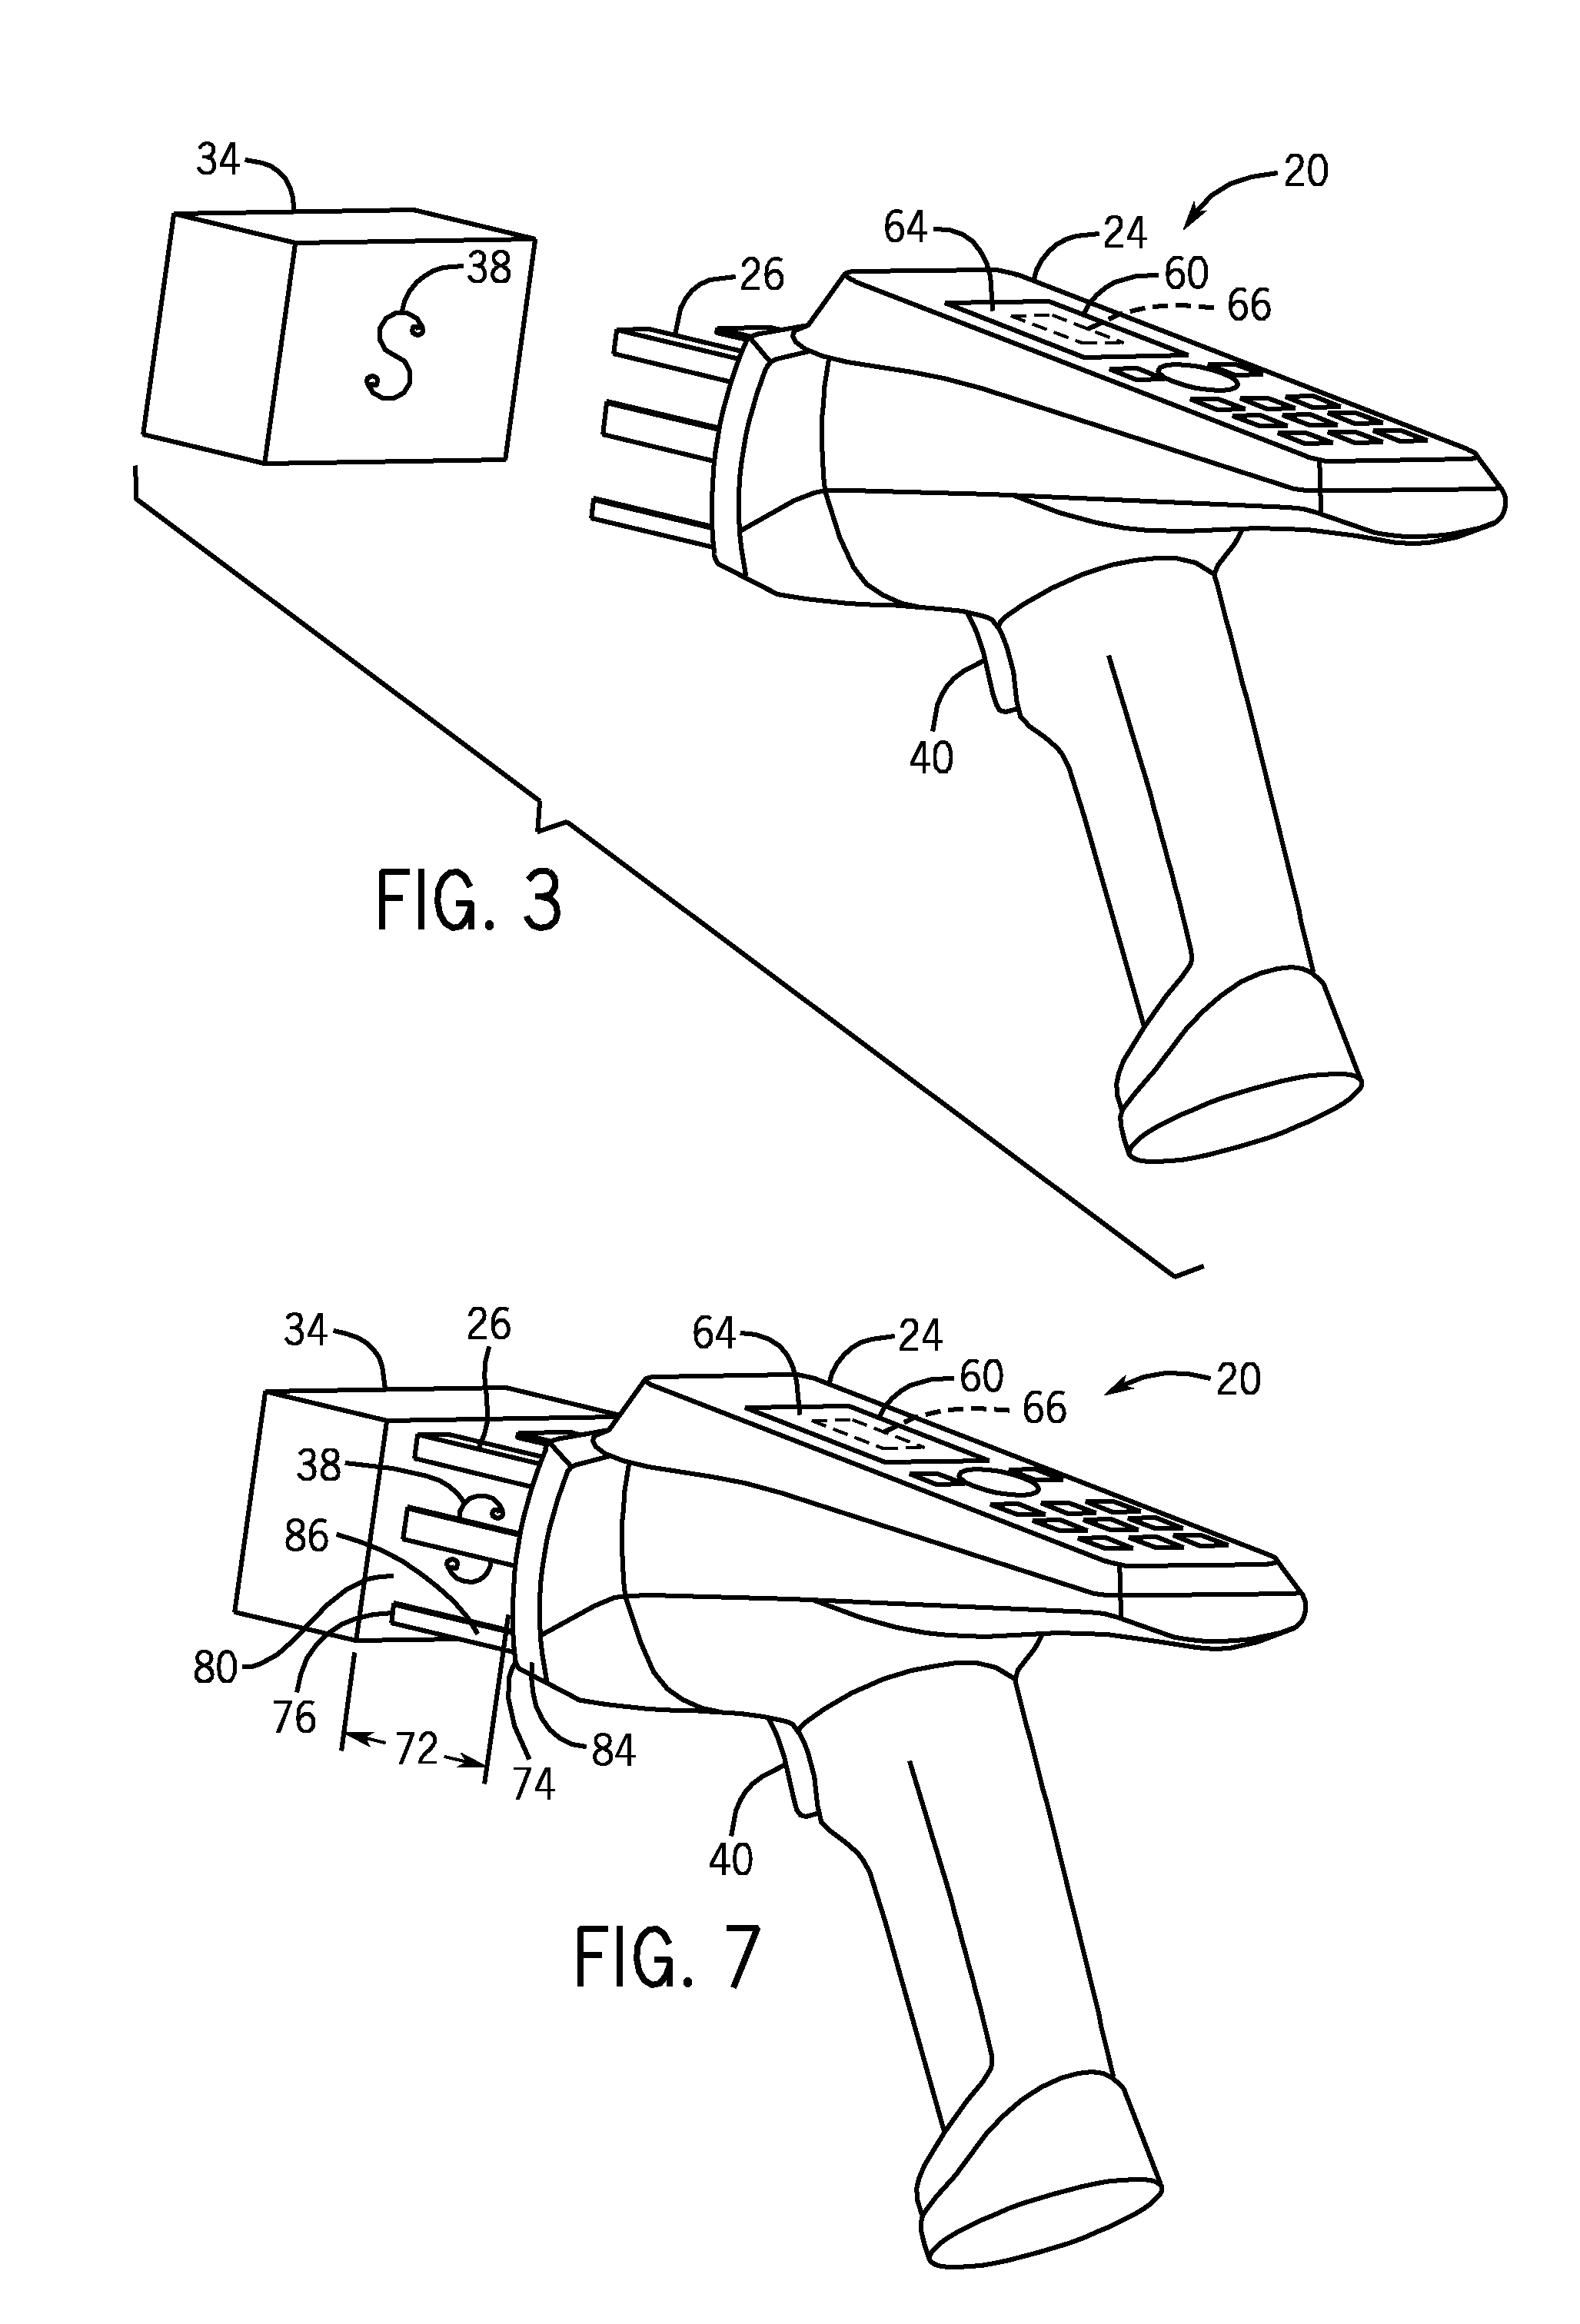 Trainable handheld optical character recognition systems and methods